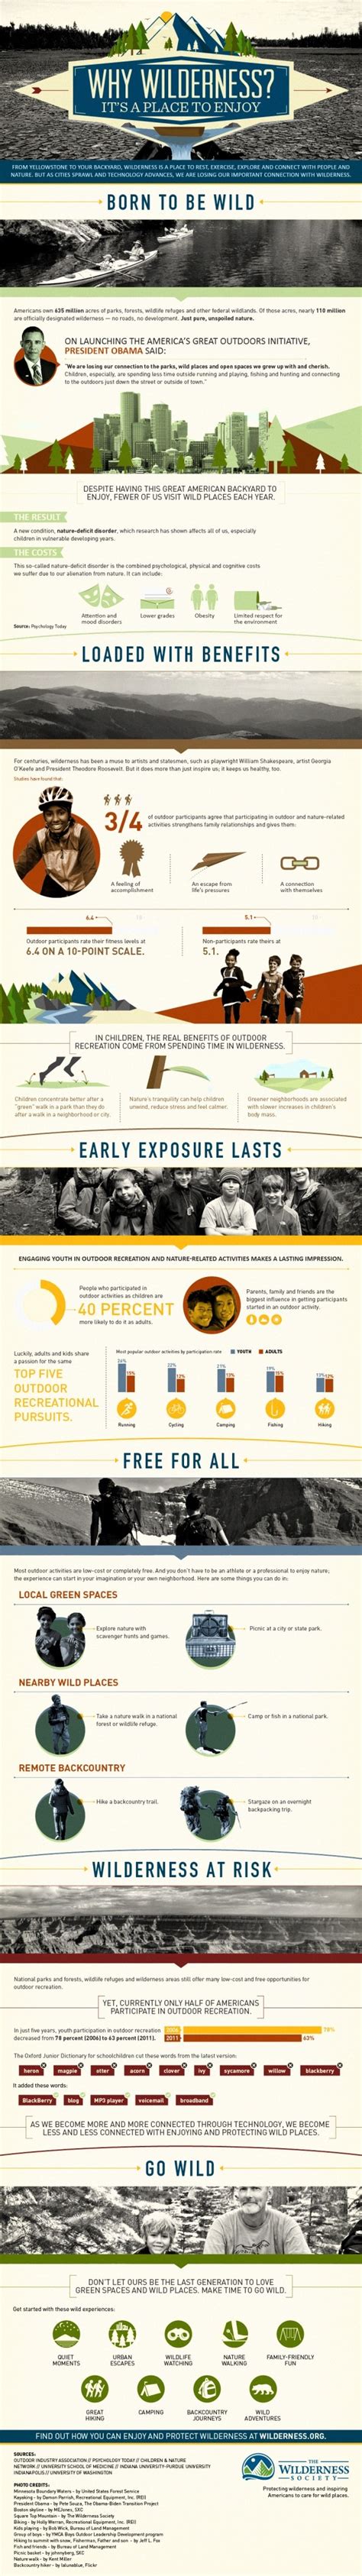 Why Does Wilderness Matter Visually Infographic Wilderness Wild